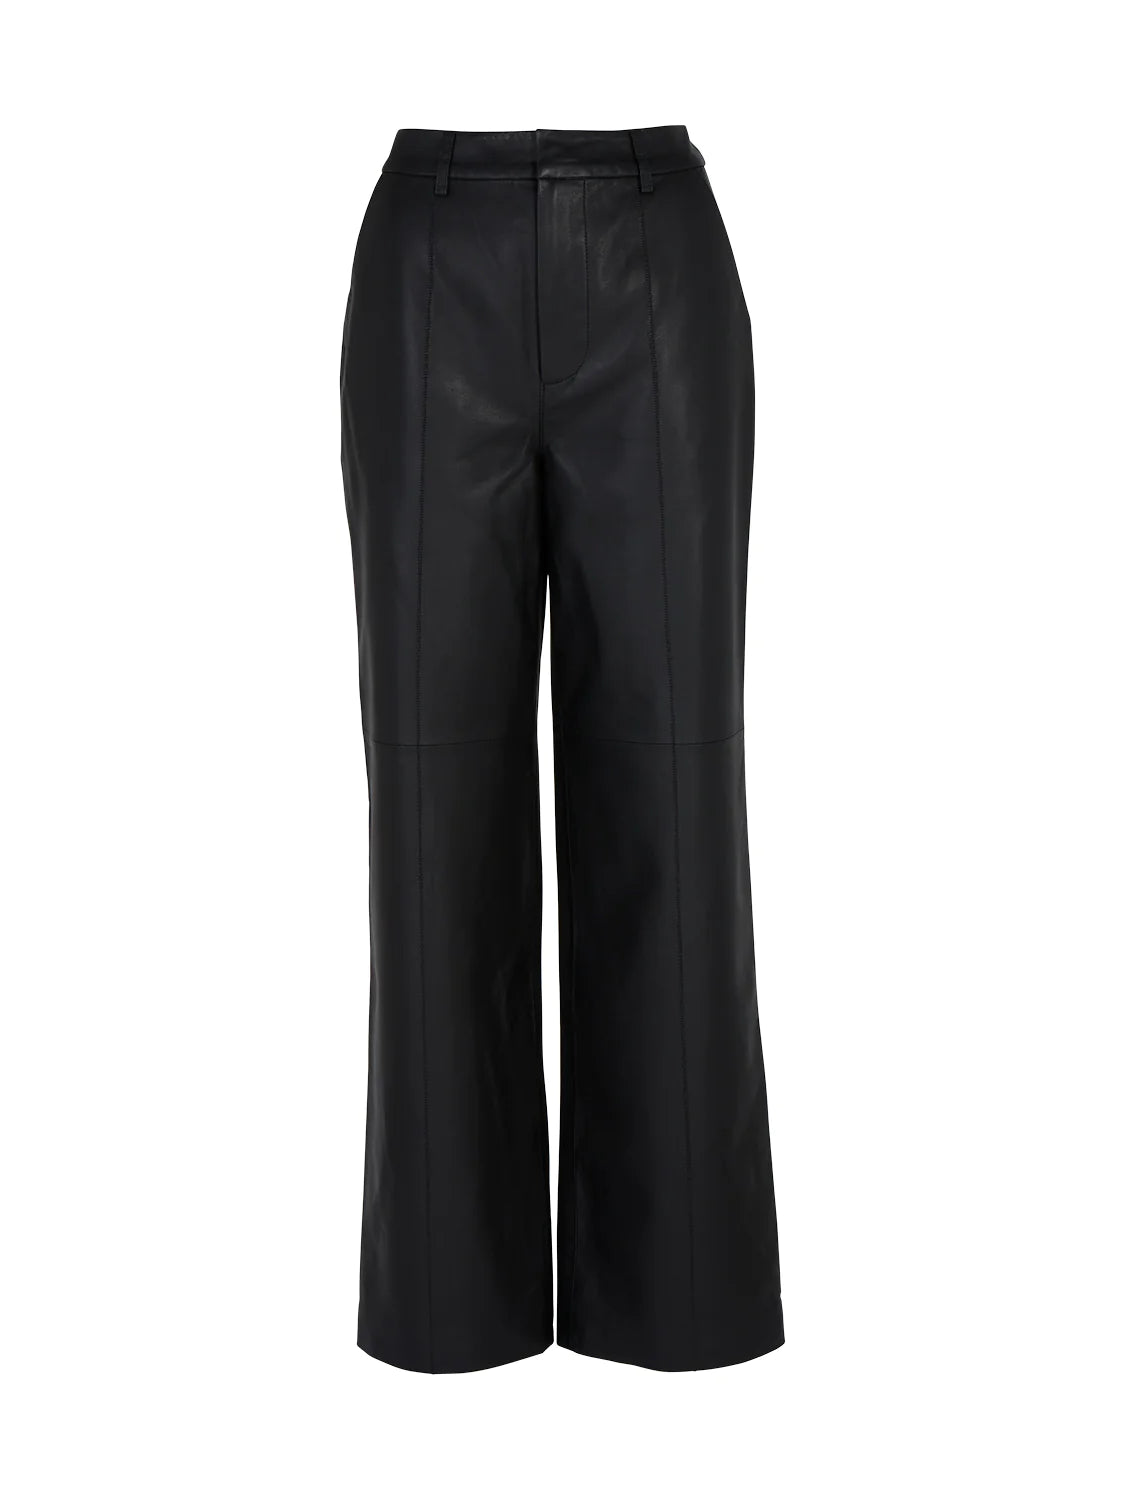 ENA PELLY - STANFORD LEATHER PANT - BLACK